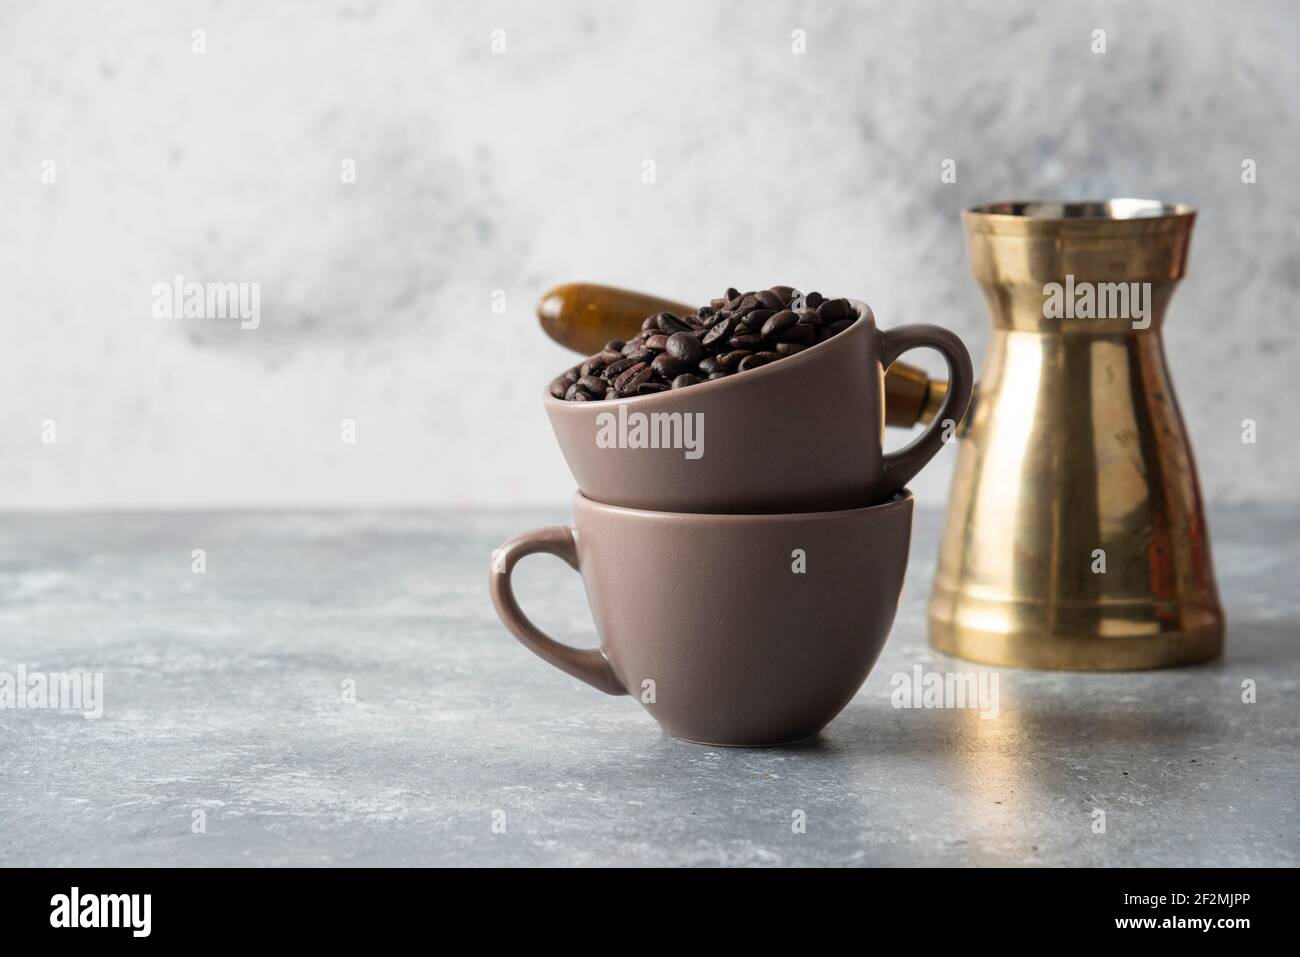 Cup full of coffee beans and coffee maker on marble background Stock Photo